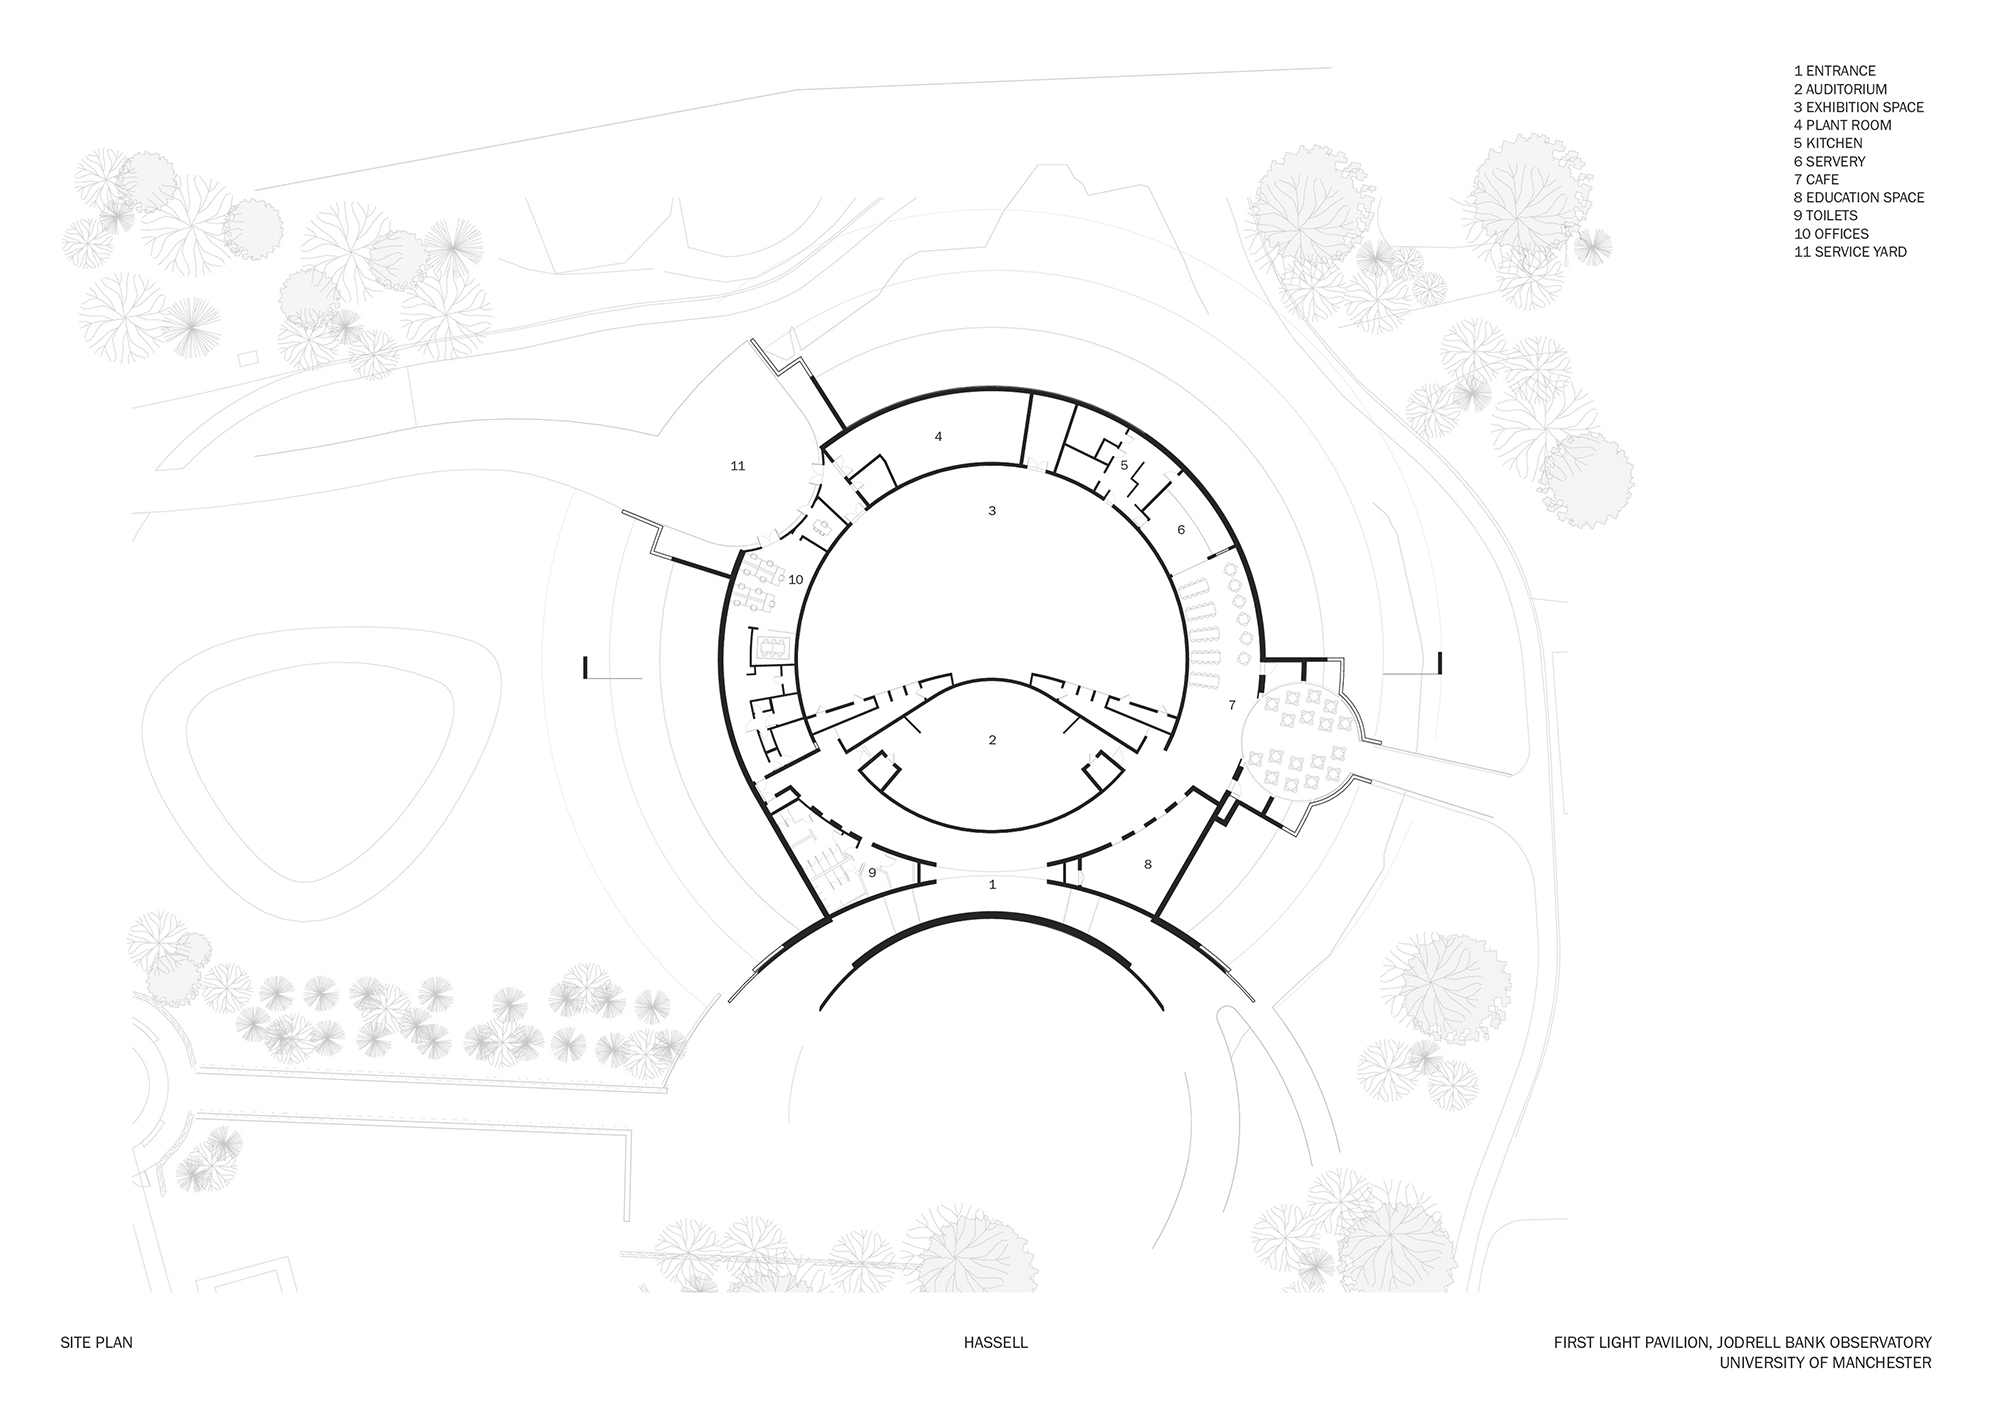 Plan view of the First Light Pavilion. (Image courtesy of Hassell)